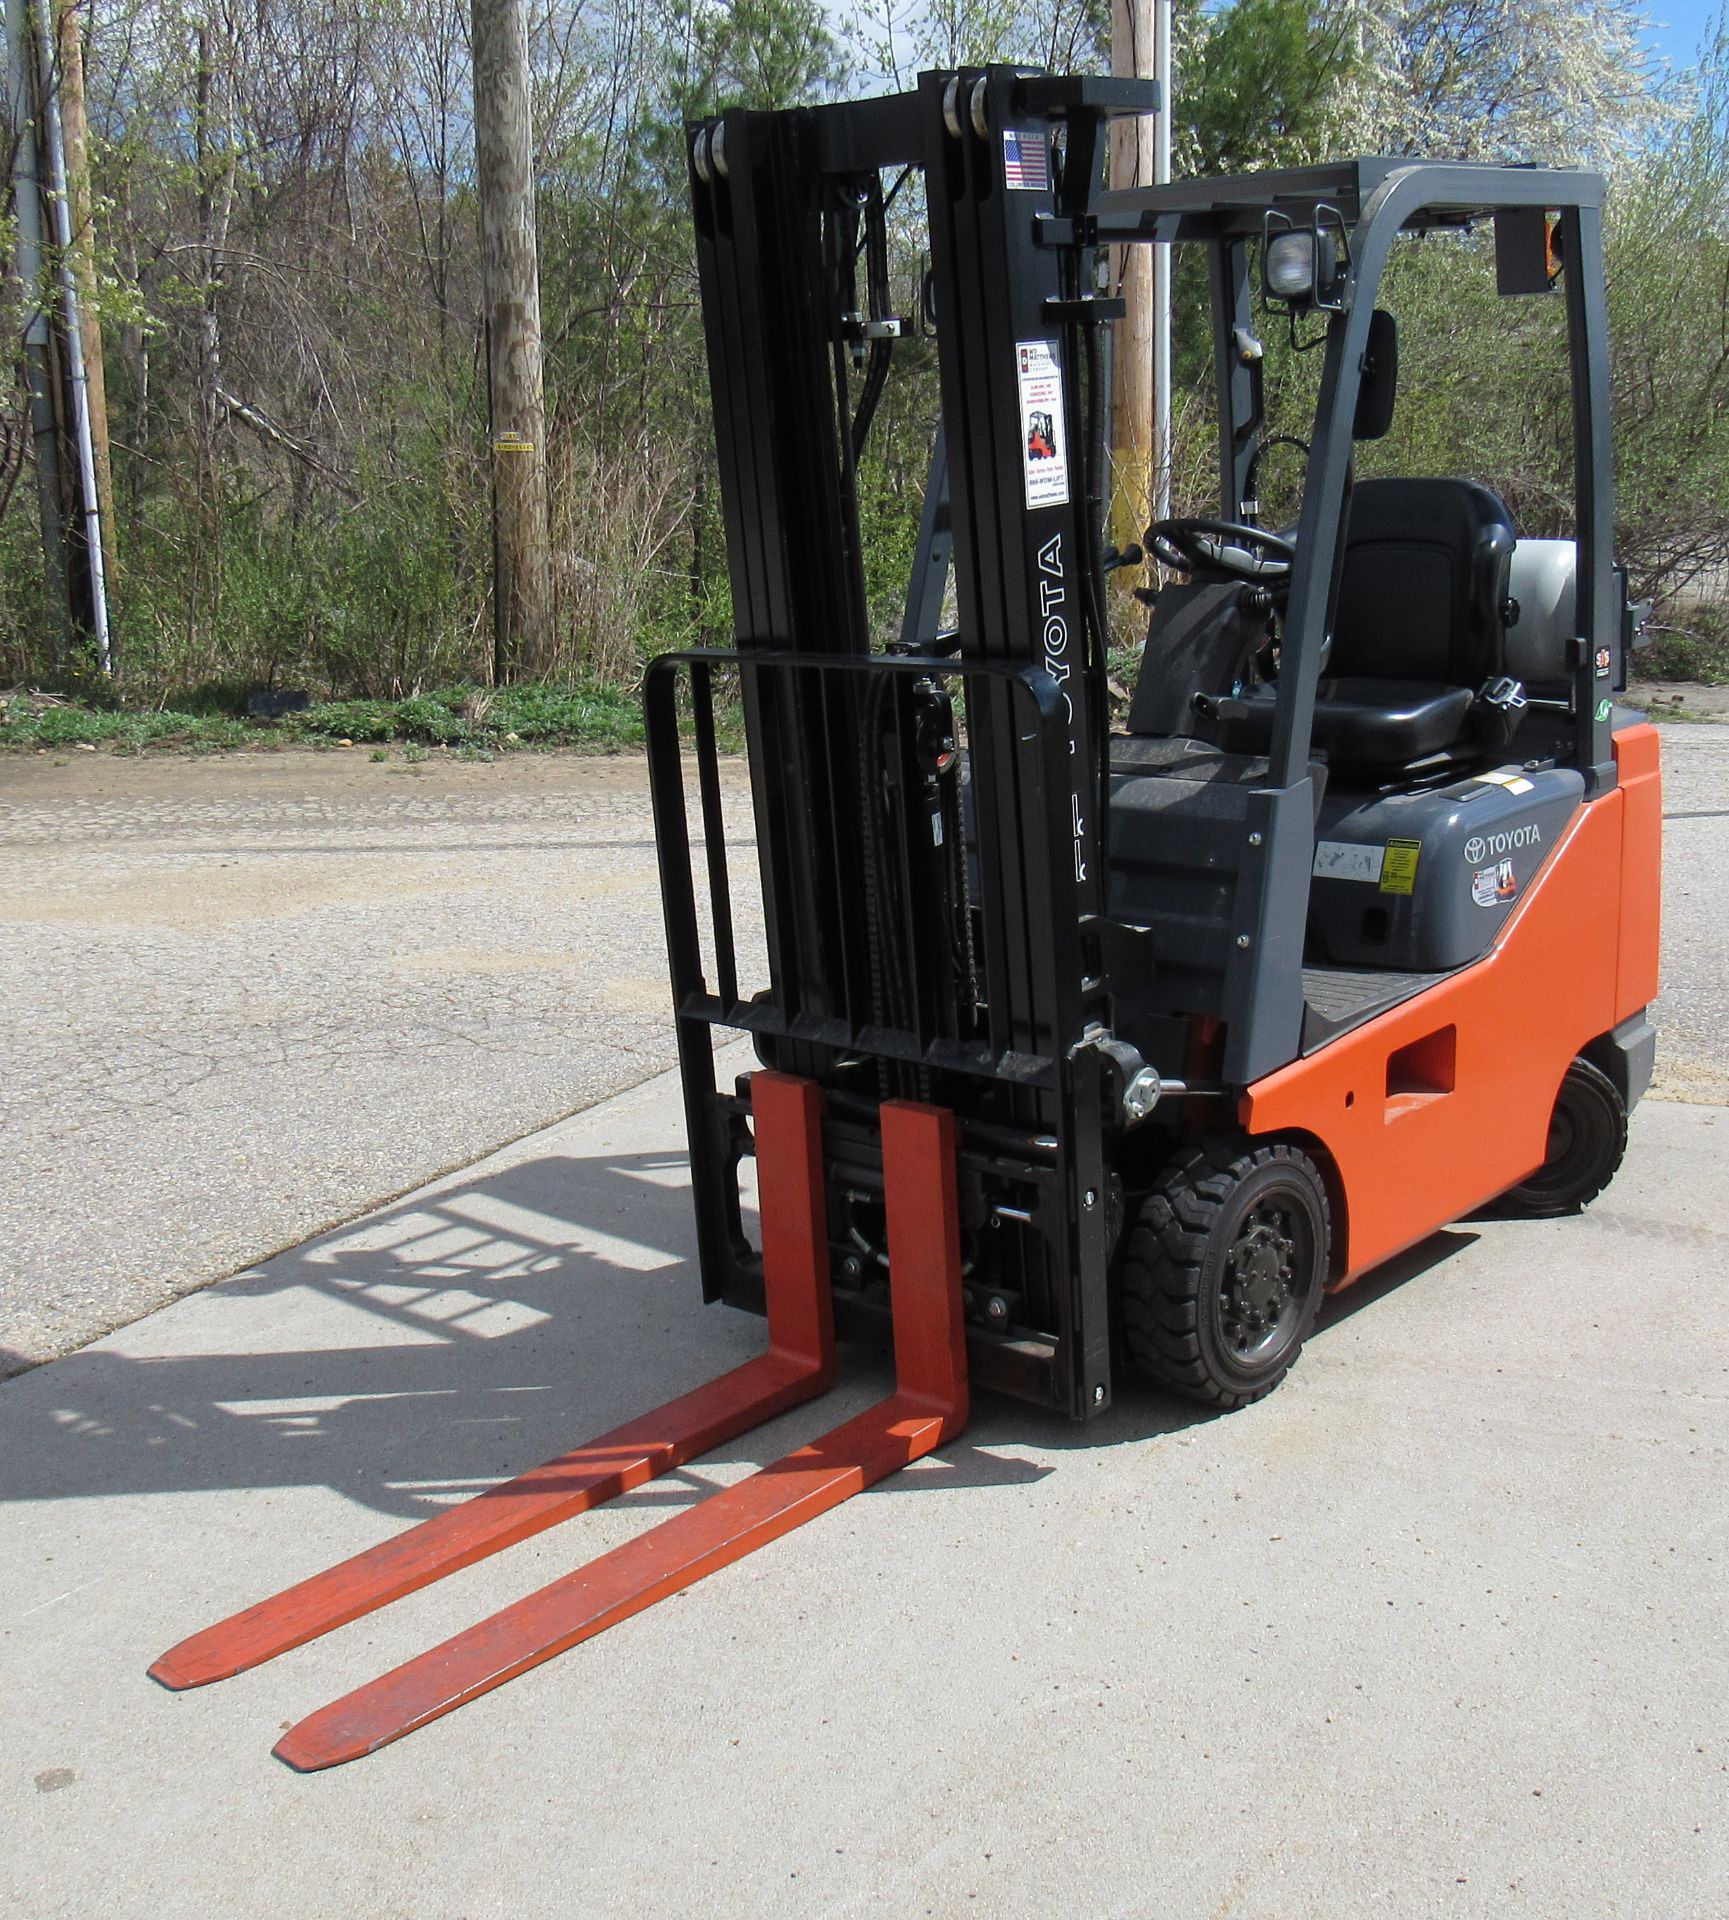 Toyota 8FGCSU20 Forklift (32 Hrs.) 4,000lb Capacity - Image 3 of 11